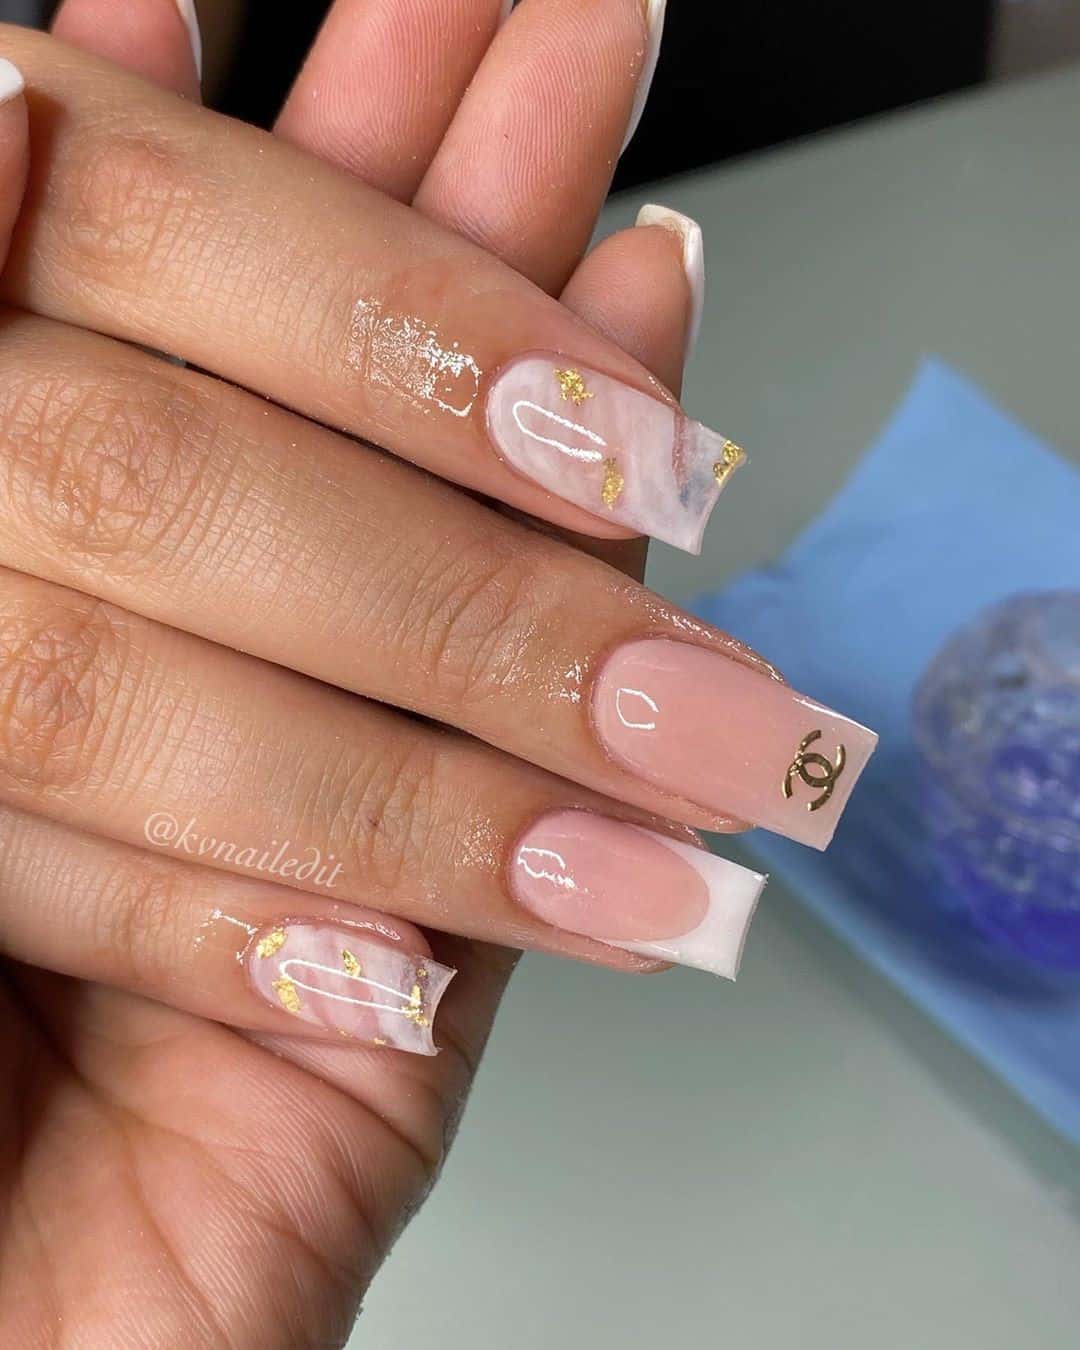 Medium Long Square Shaped Nude Nails With Chanel Details